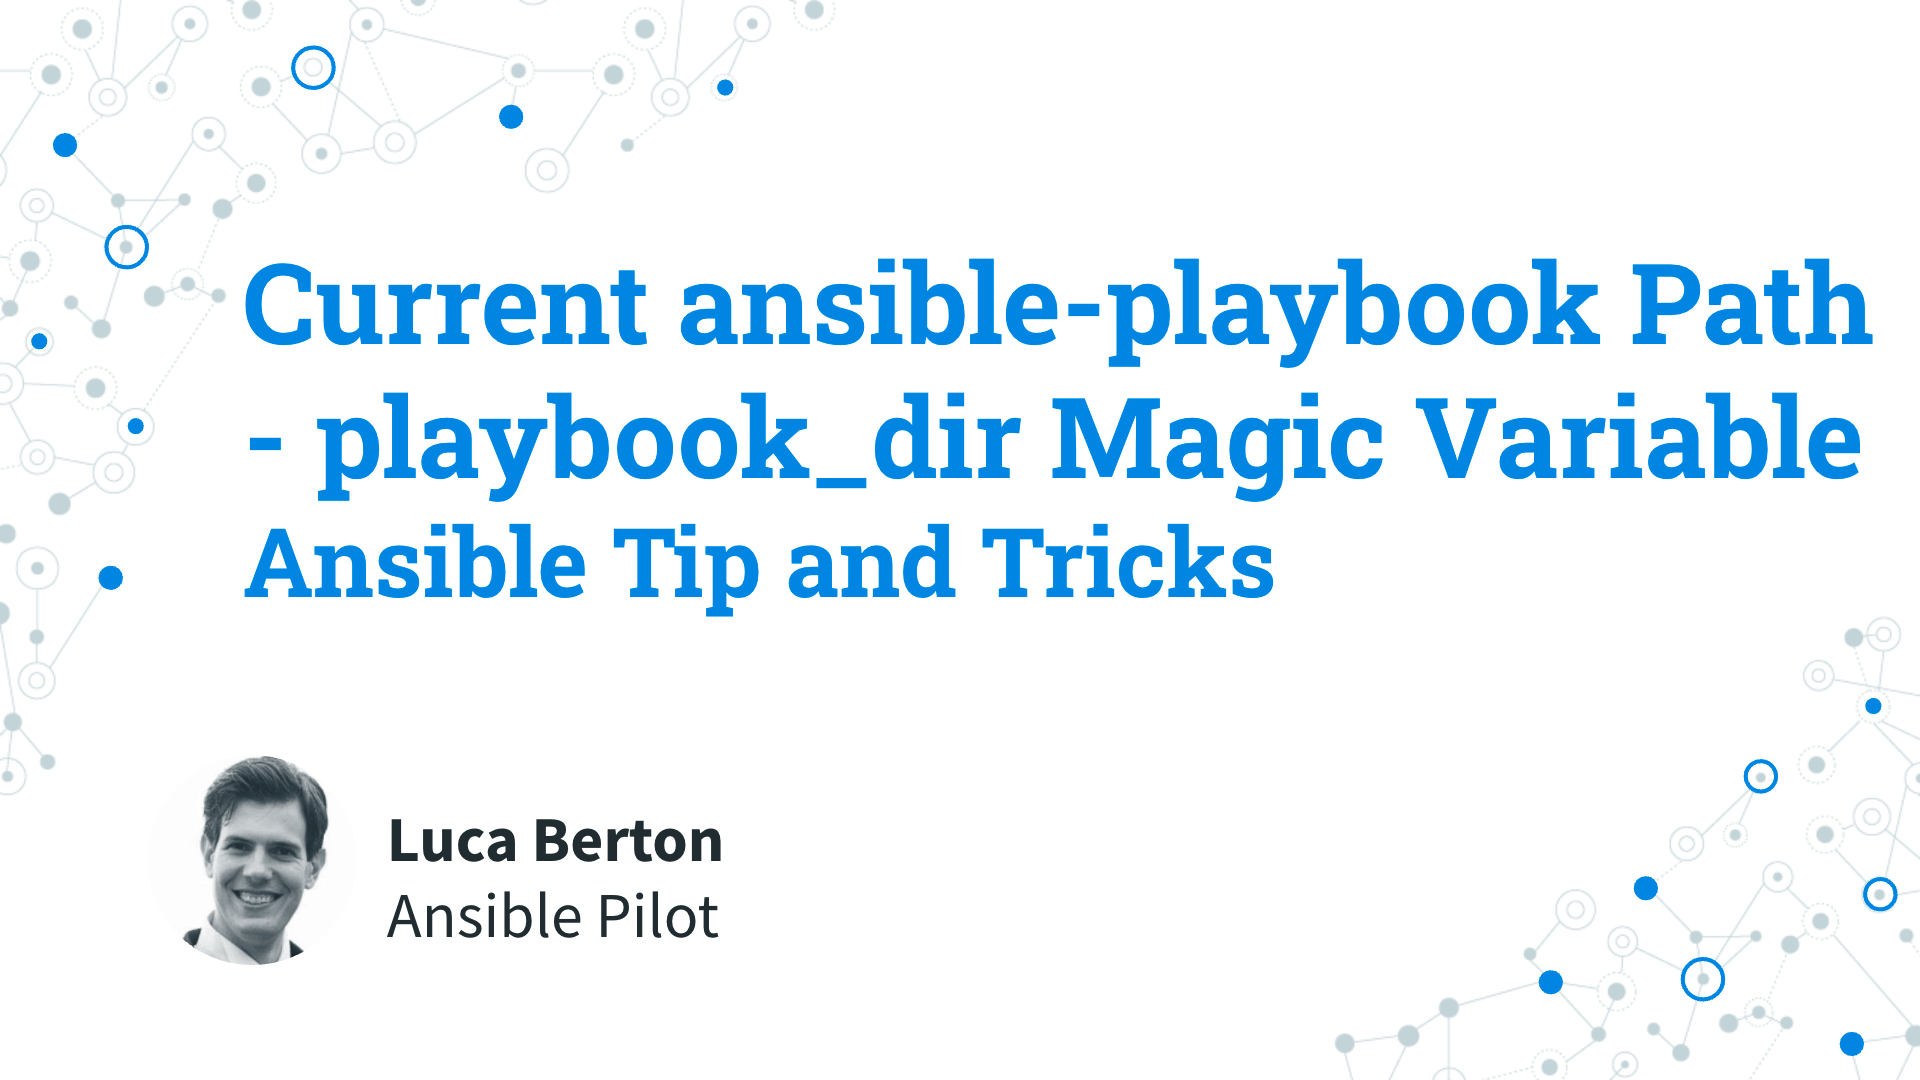 Current ansible-playbook Path - playbook_dir Magic Variable - Ansible Tip and Tricks